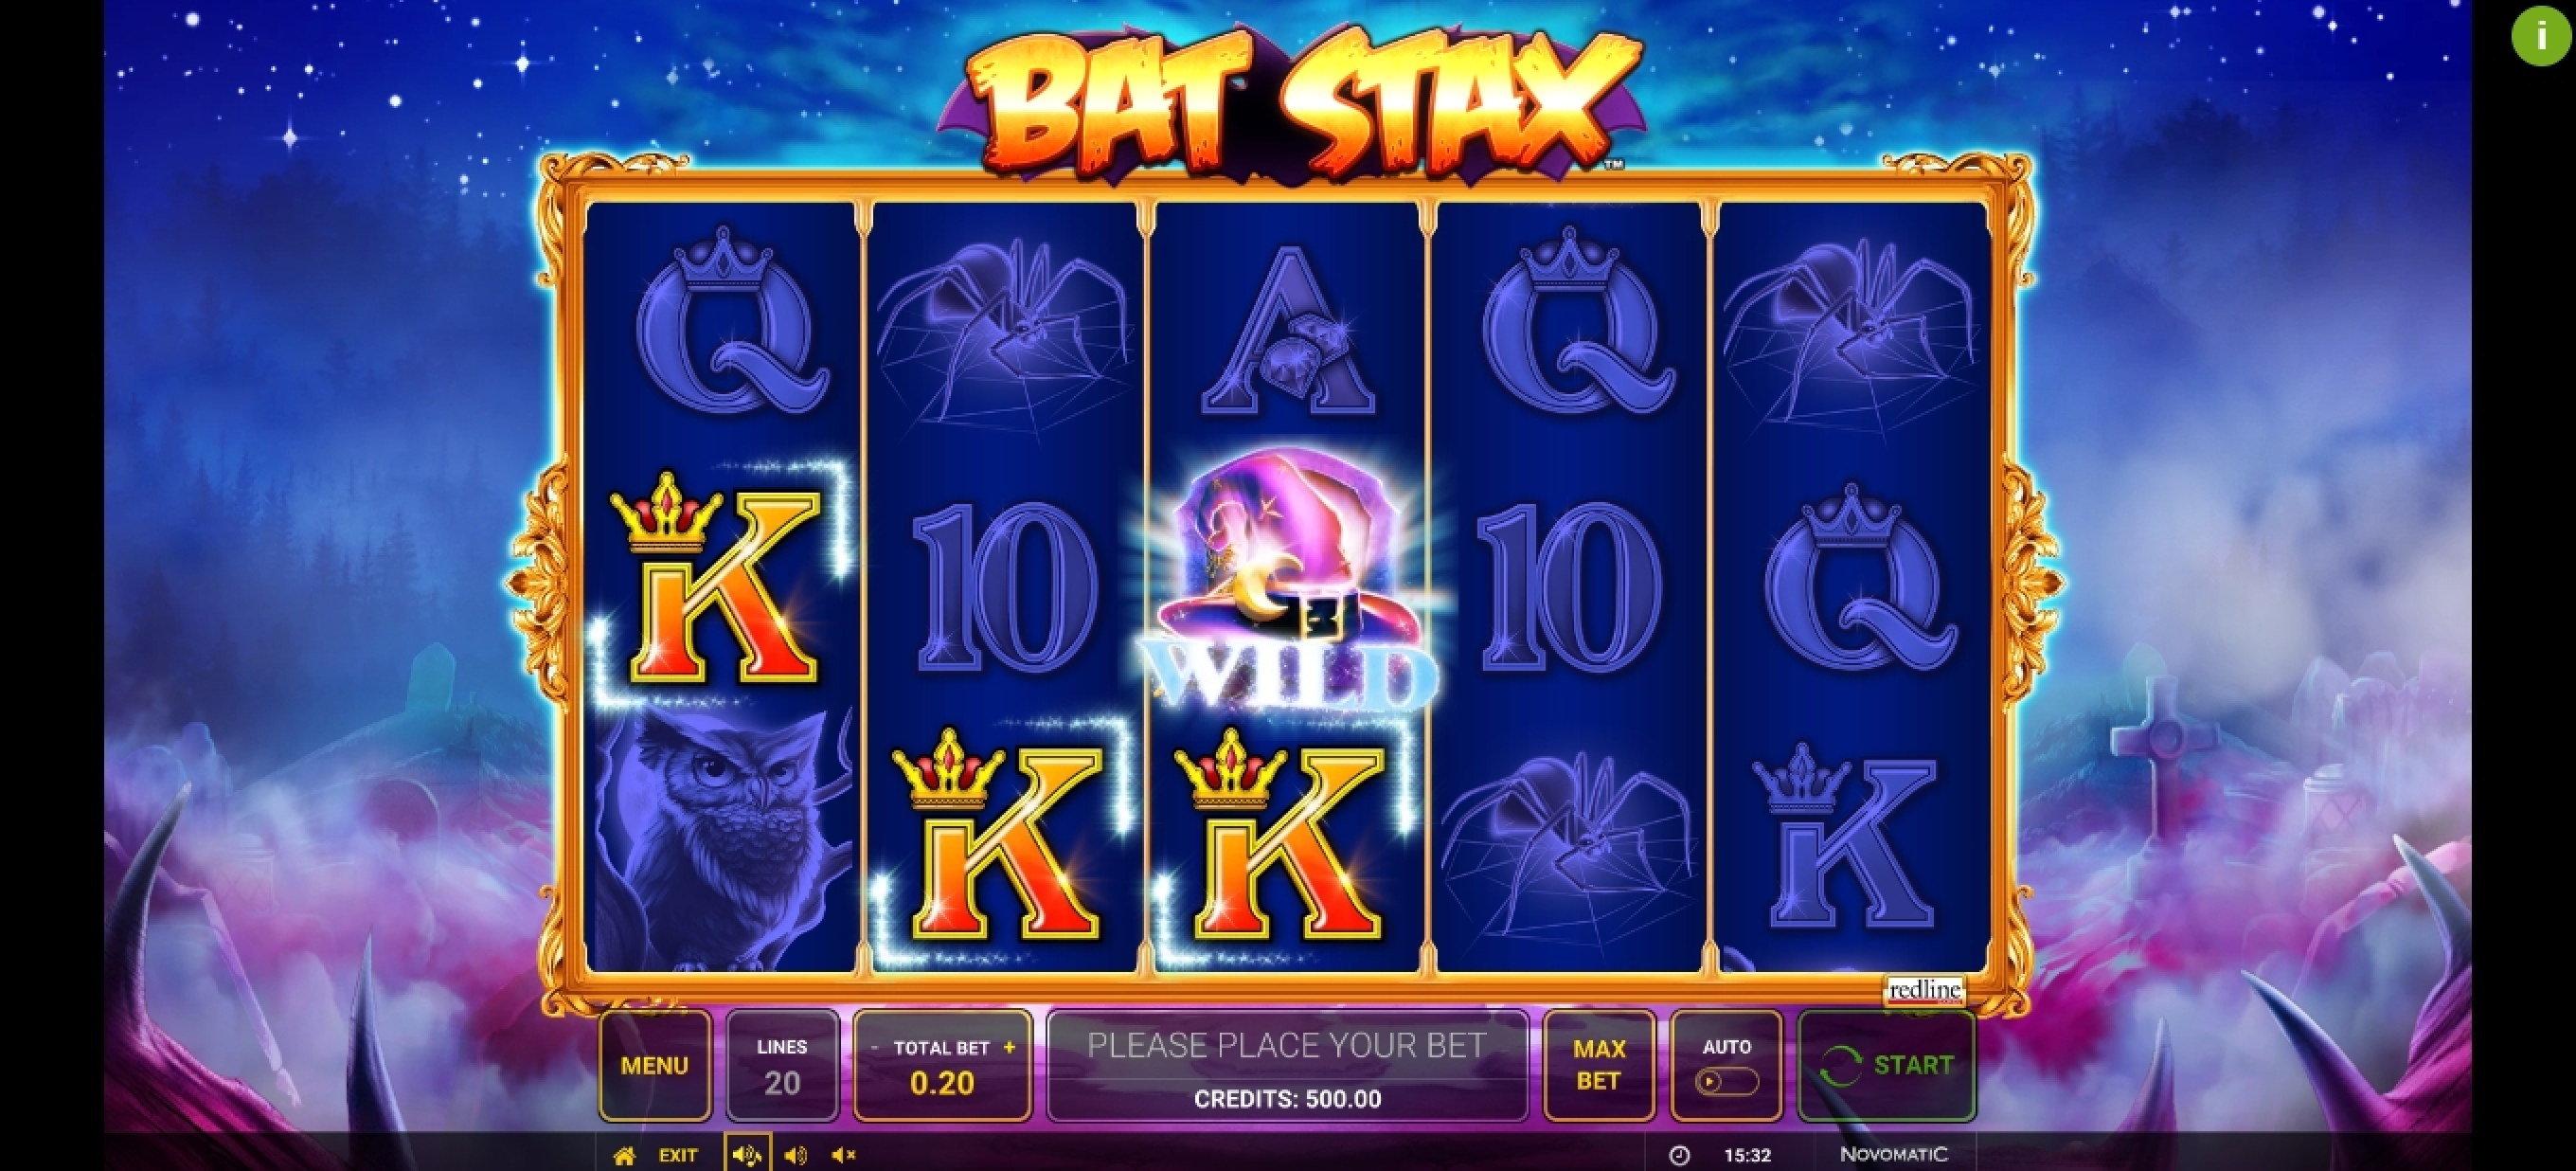 Win Money in Bat Stax Free Slot Game by Greentube